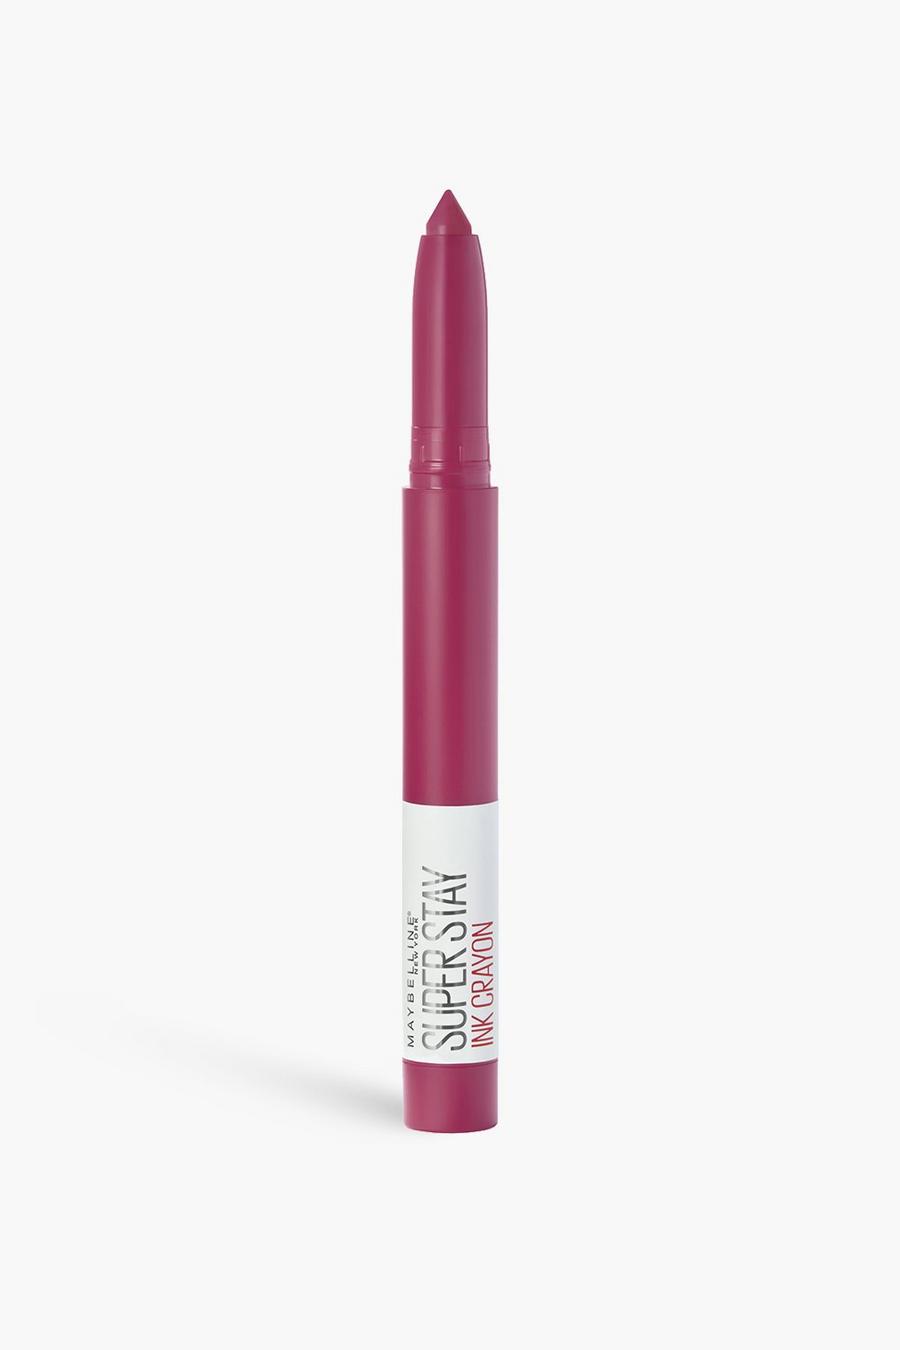 Maybelline - Rossetto Superstay Matte Crayon, 35 treat yourself